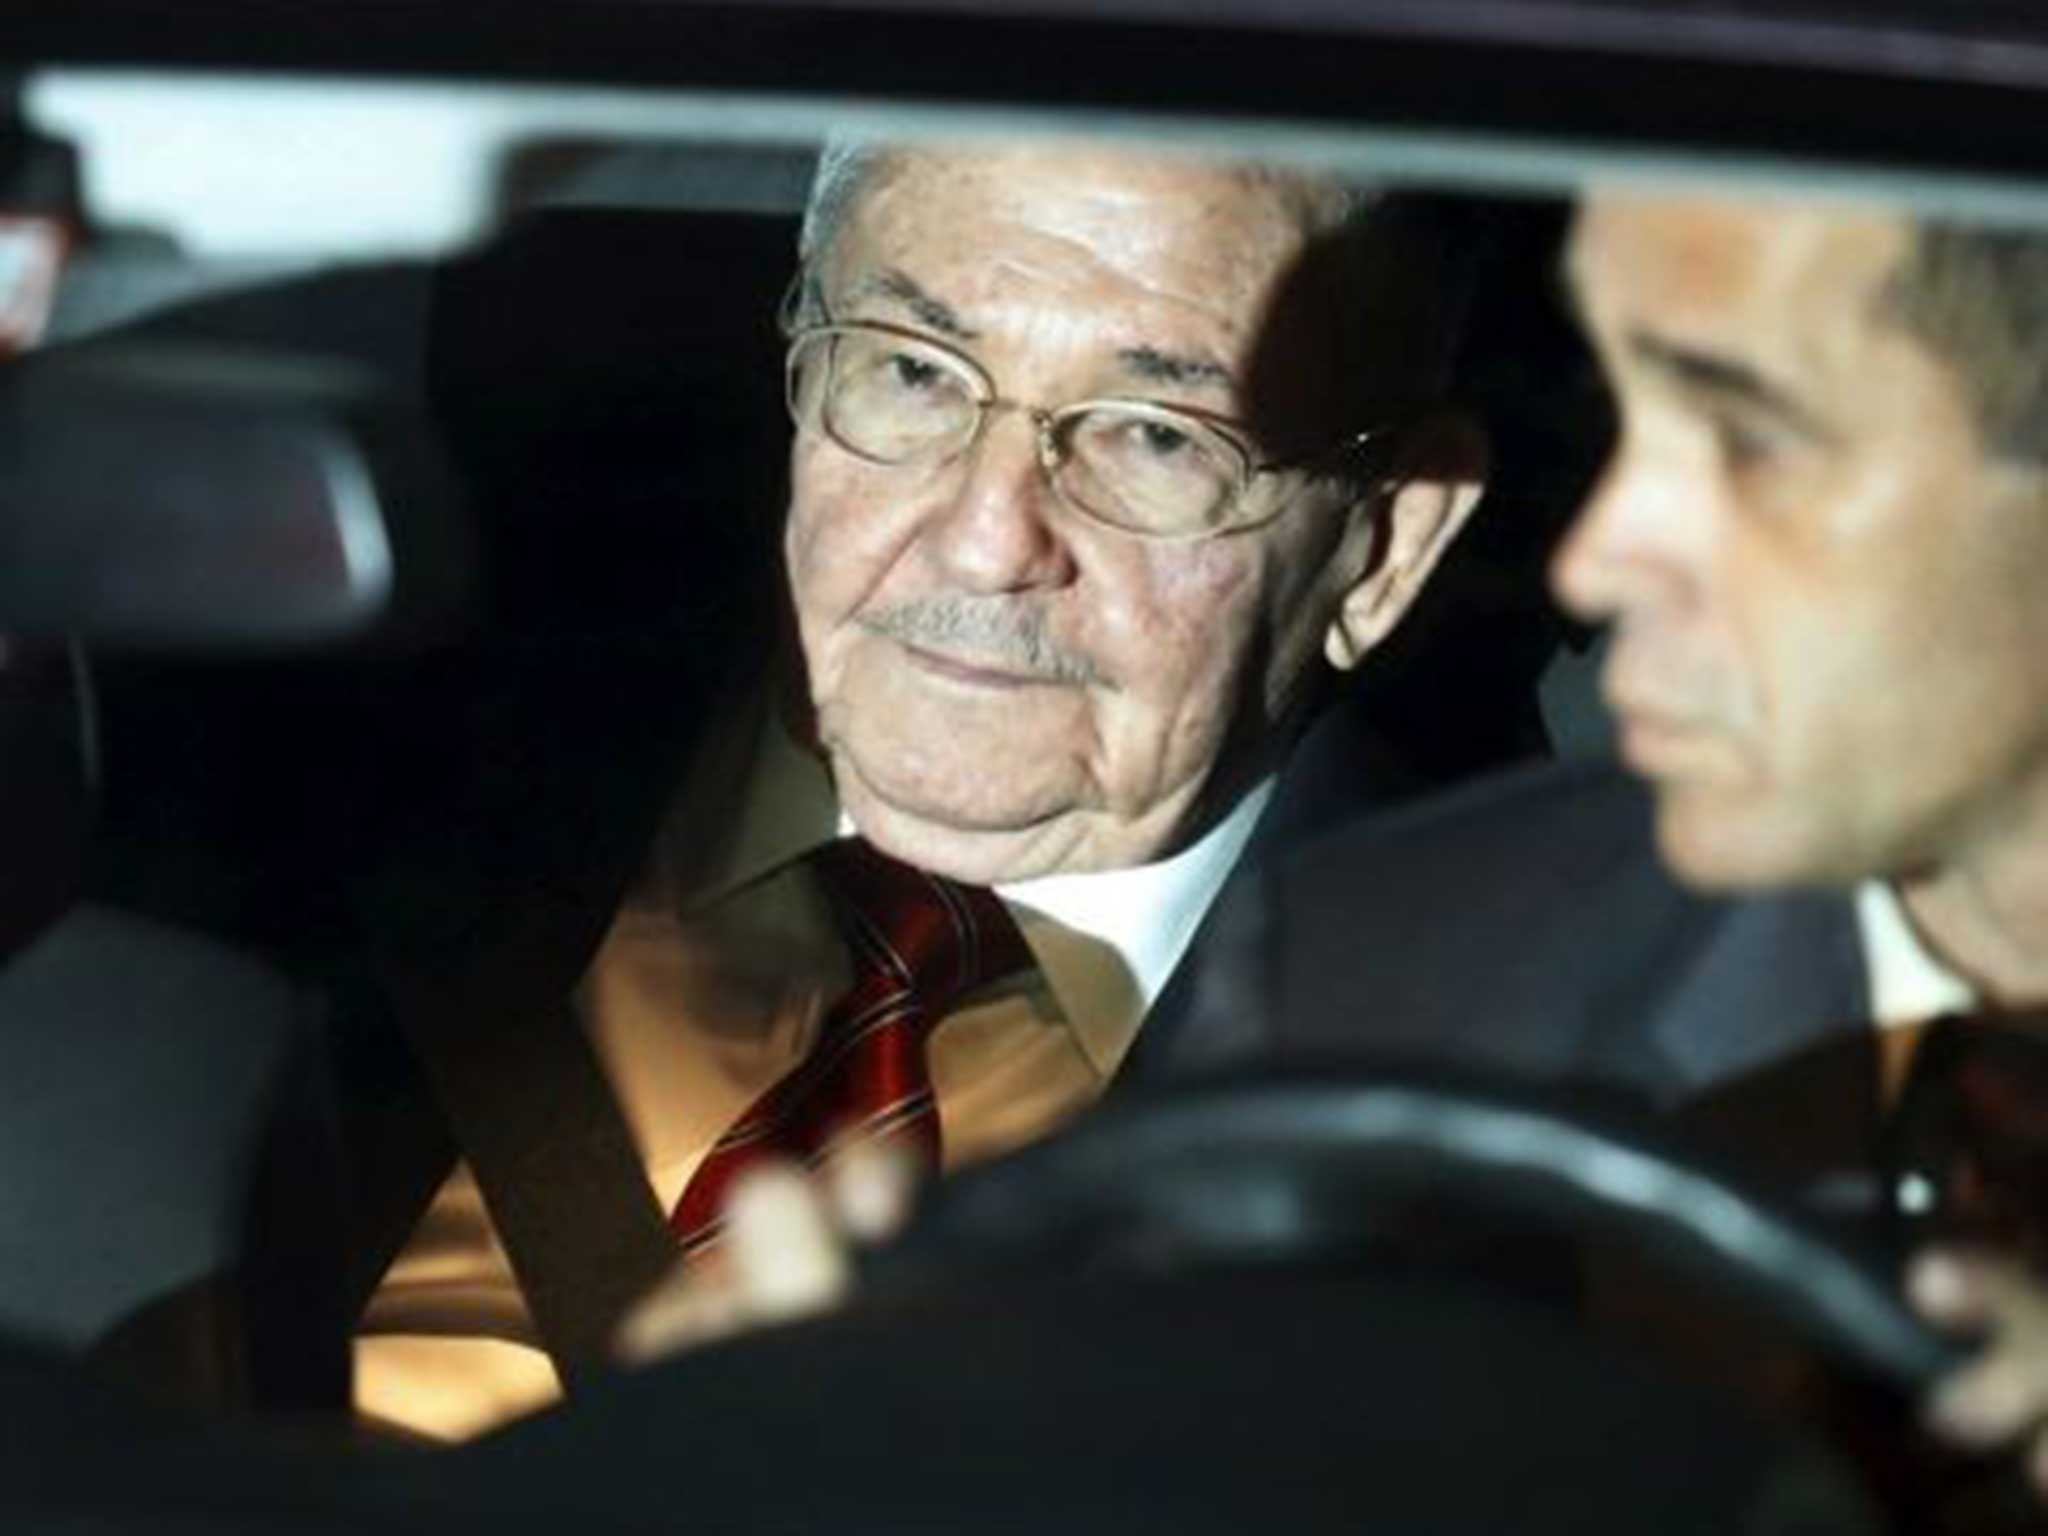 Cuba’s President Raul Castro (L) sits inside a car after arriving in Panama City